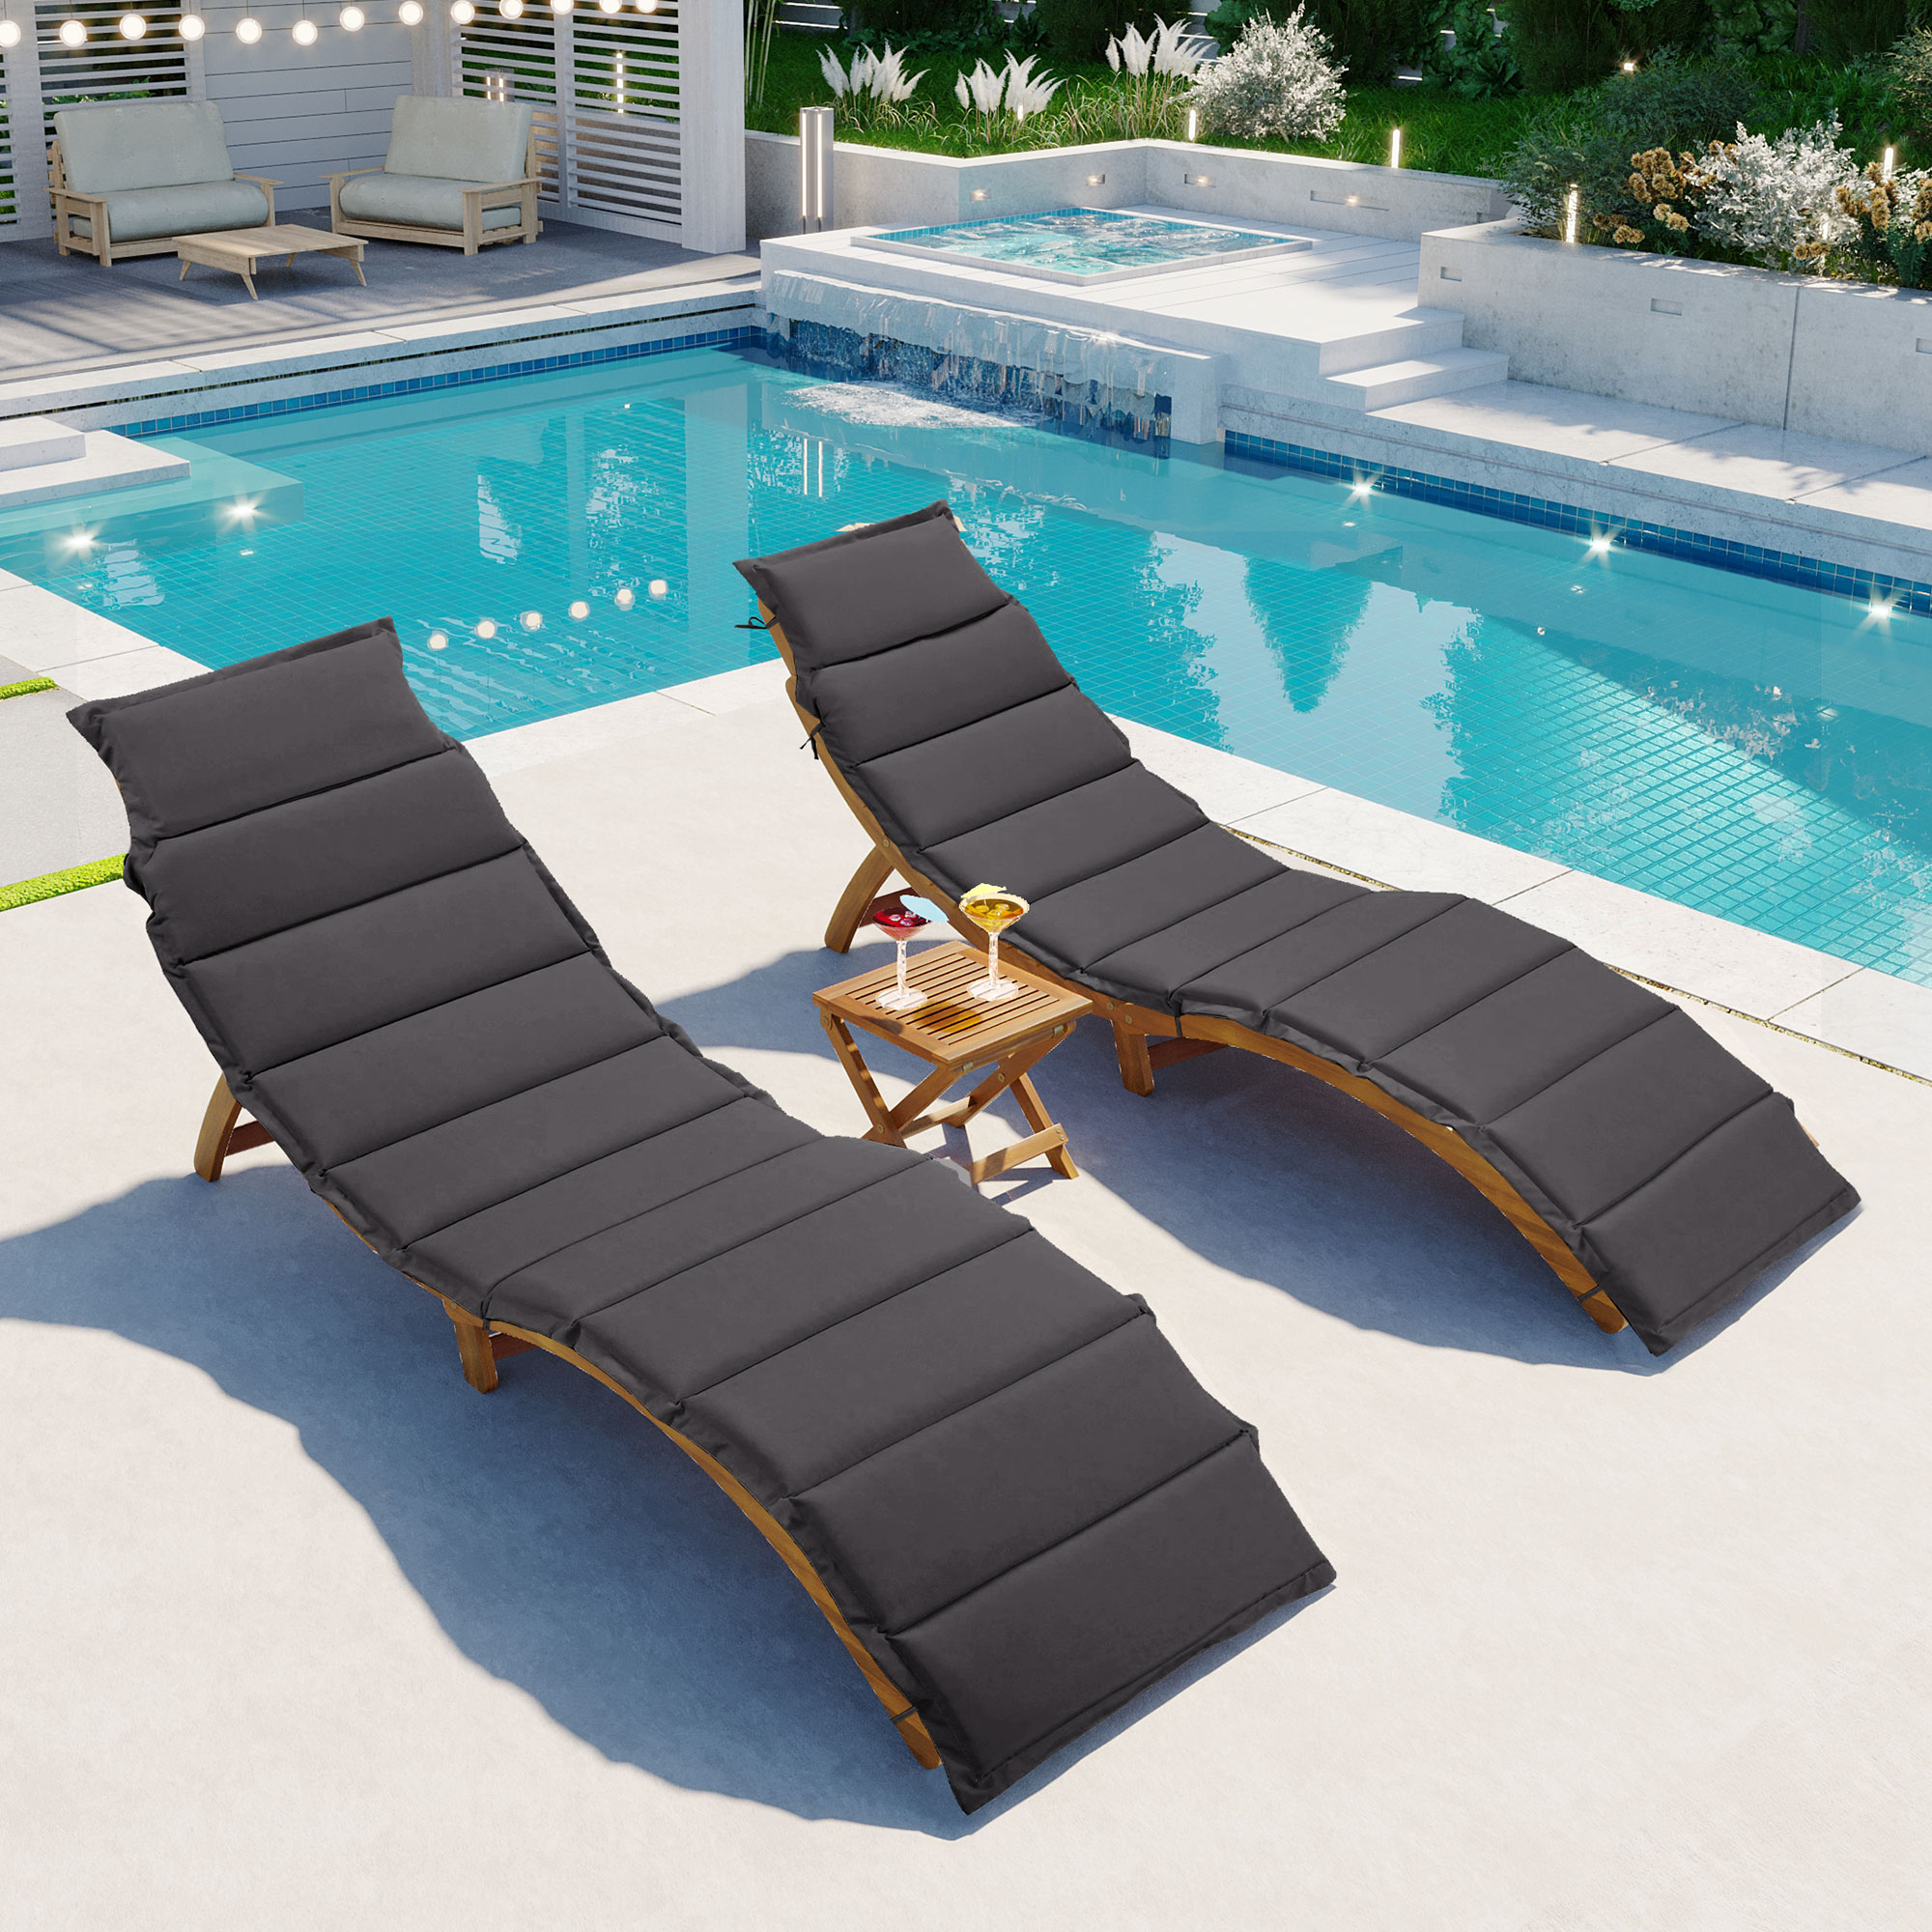 Royard Oaktree Patio Lounge Chair Set of 3 Wood Folding Chaise Lounge Set with Foldable Side Table Outdoor Portable Extended Sun Lounge Chair with Cushion for Poolside Lawn Backyard,Dark Gray - image 1 of 7